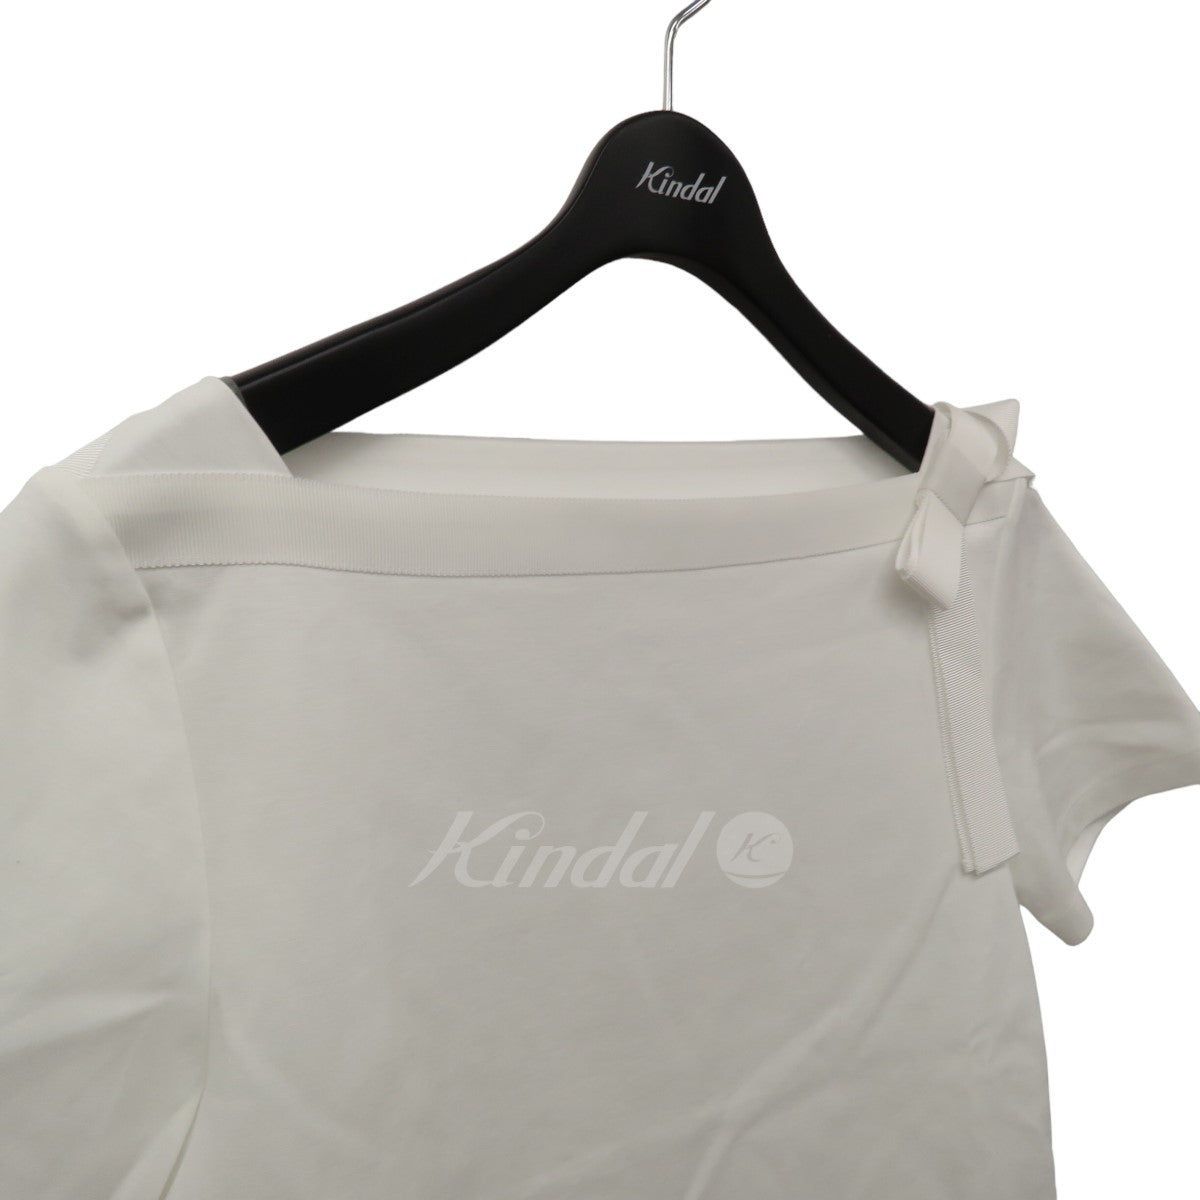 22SS LE CADEAU TOP リボンカットソー Tシャツ　42993